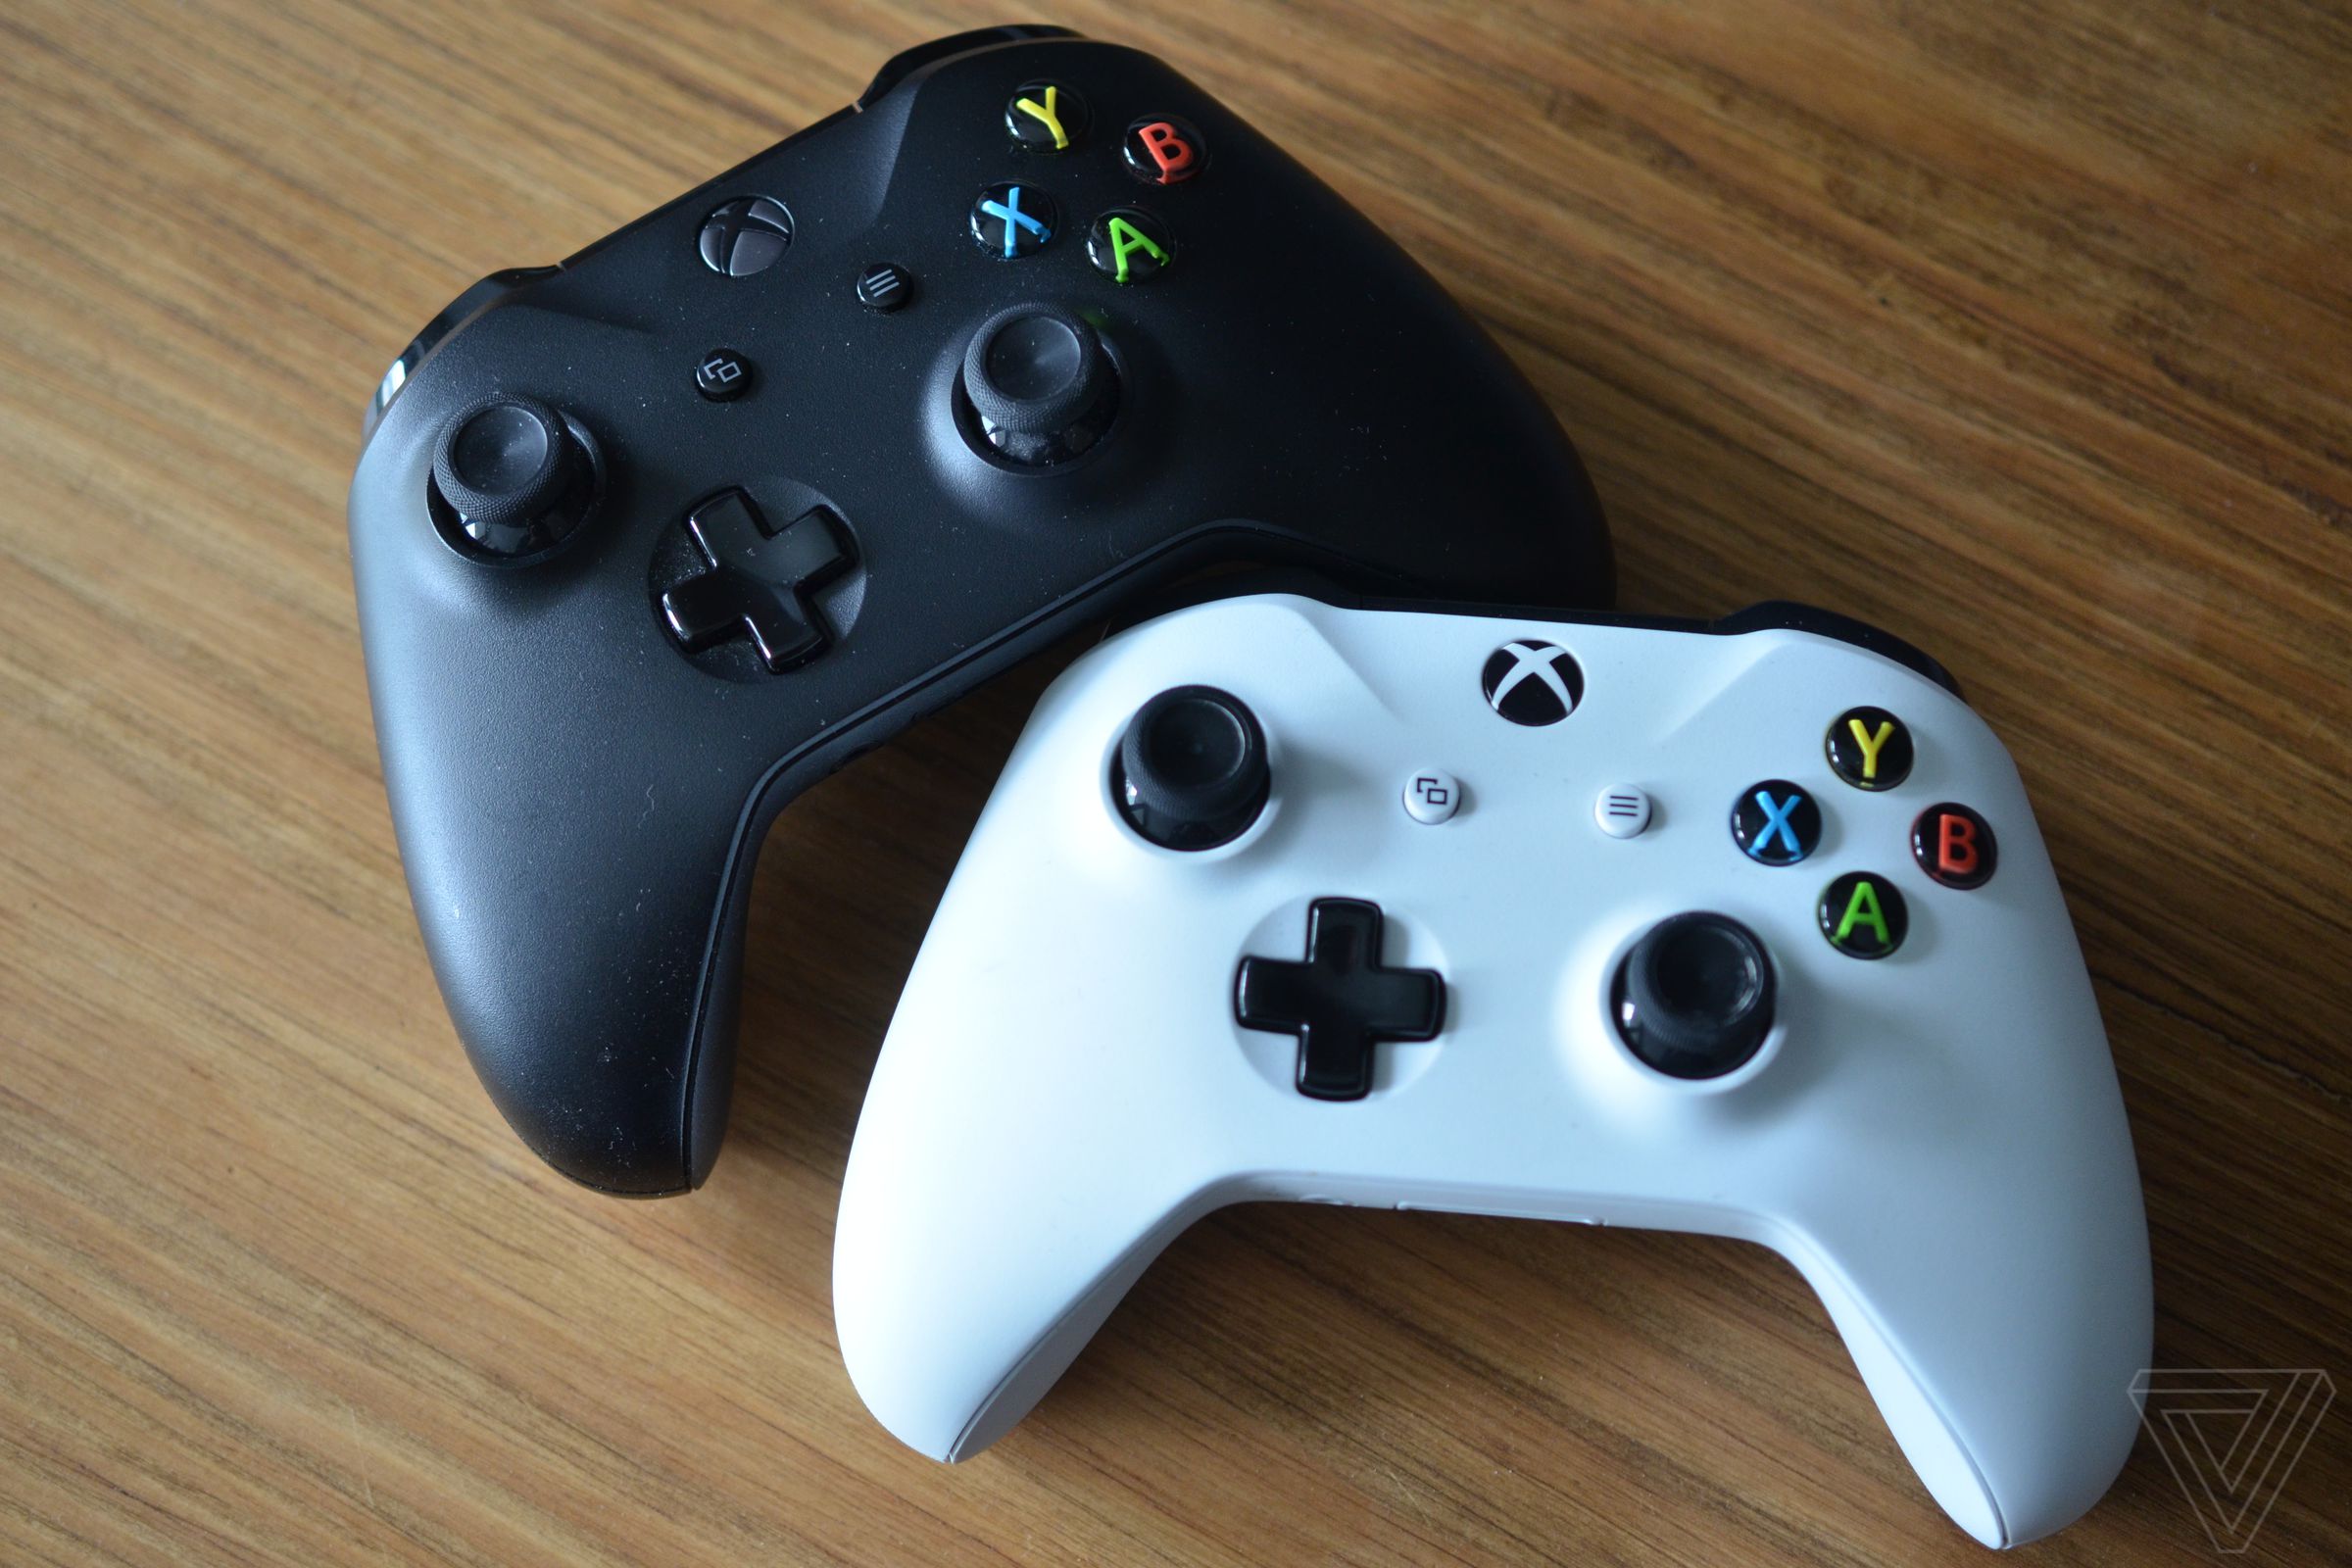 Existing Xbox One controllers.